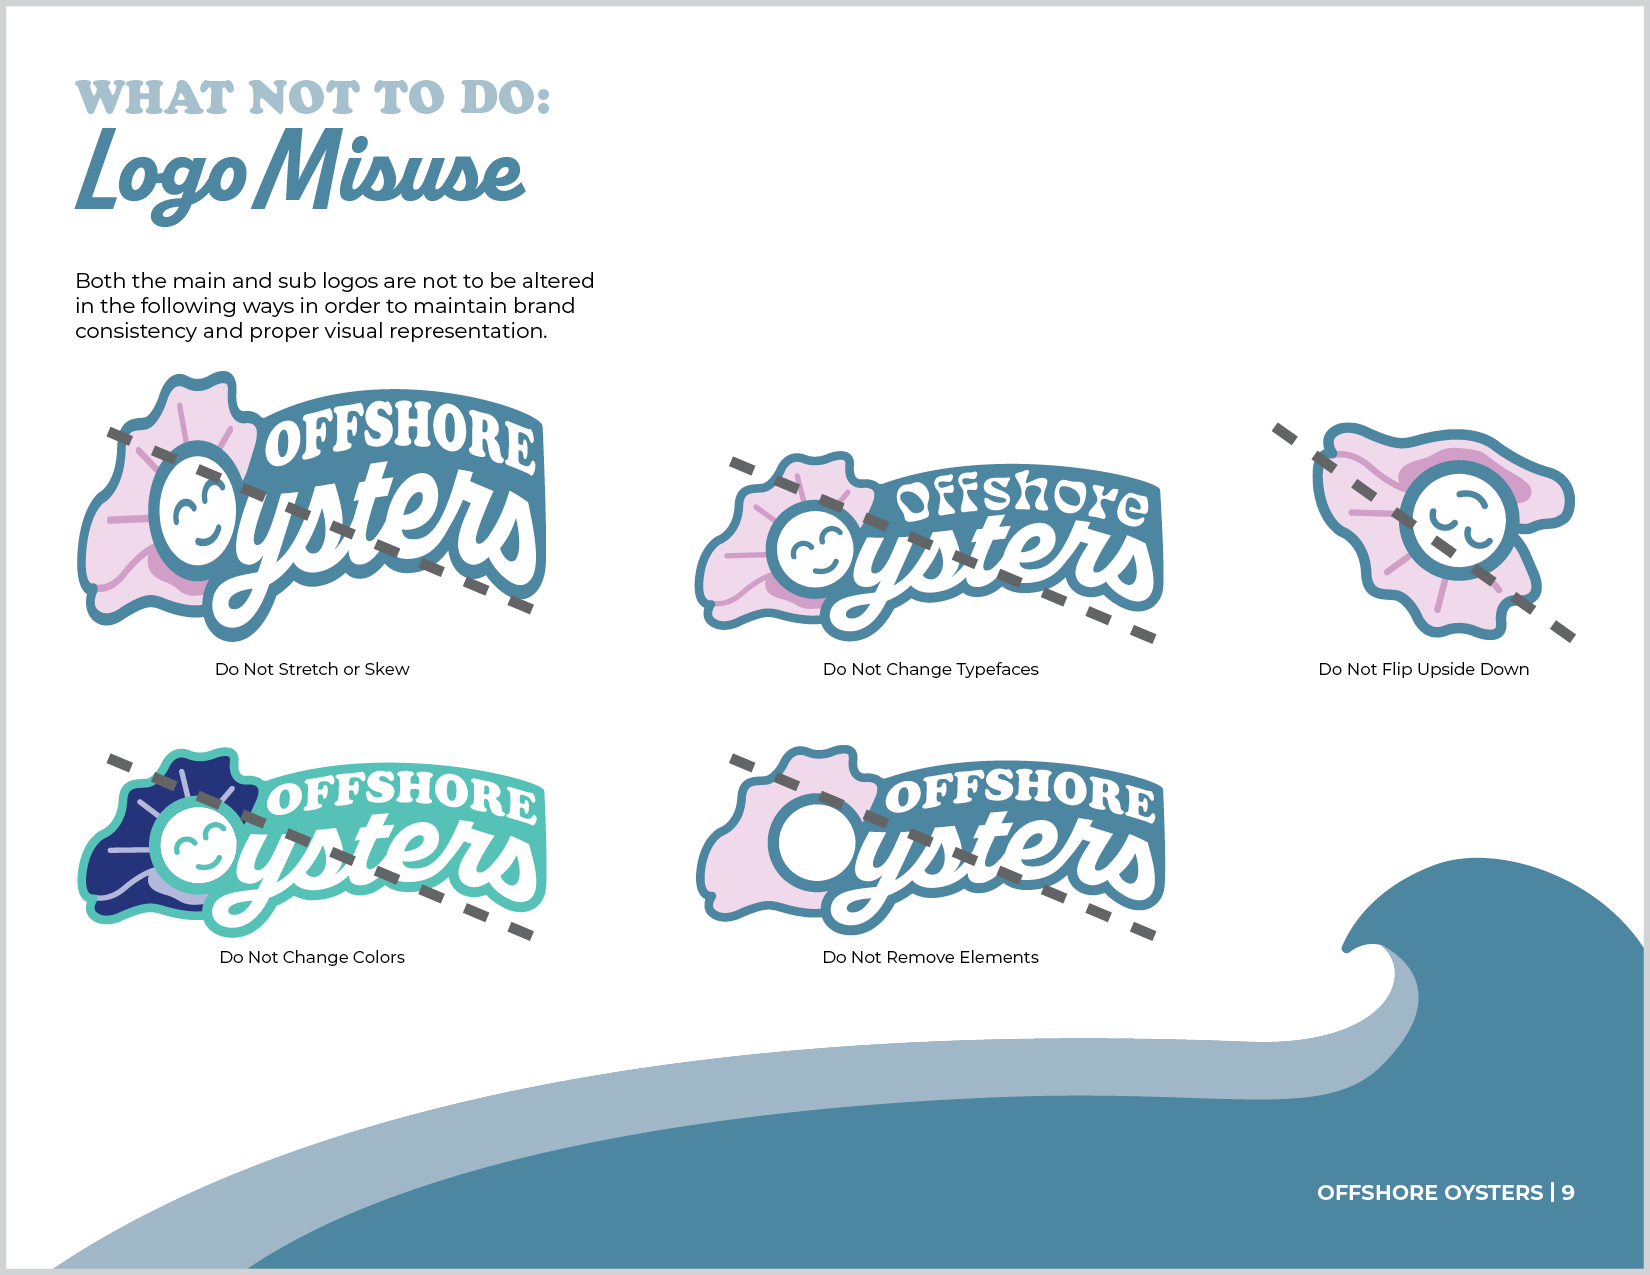 Offshore Oysters brand guideline logo misuse.